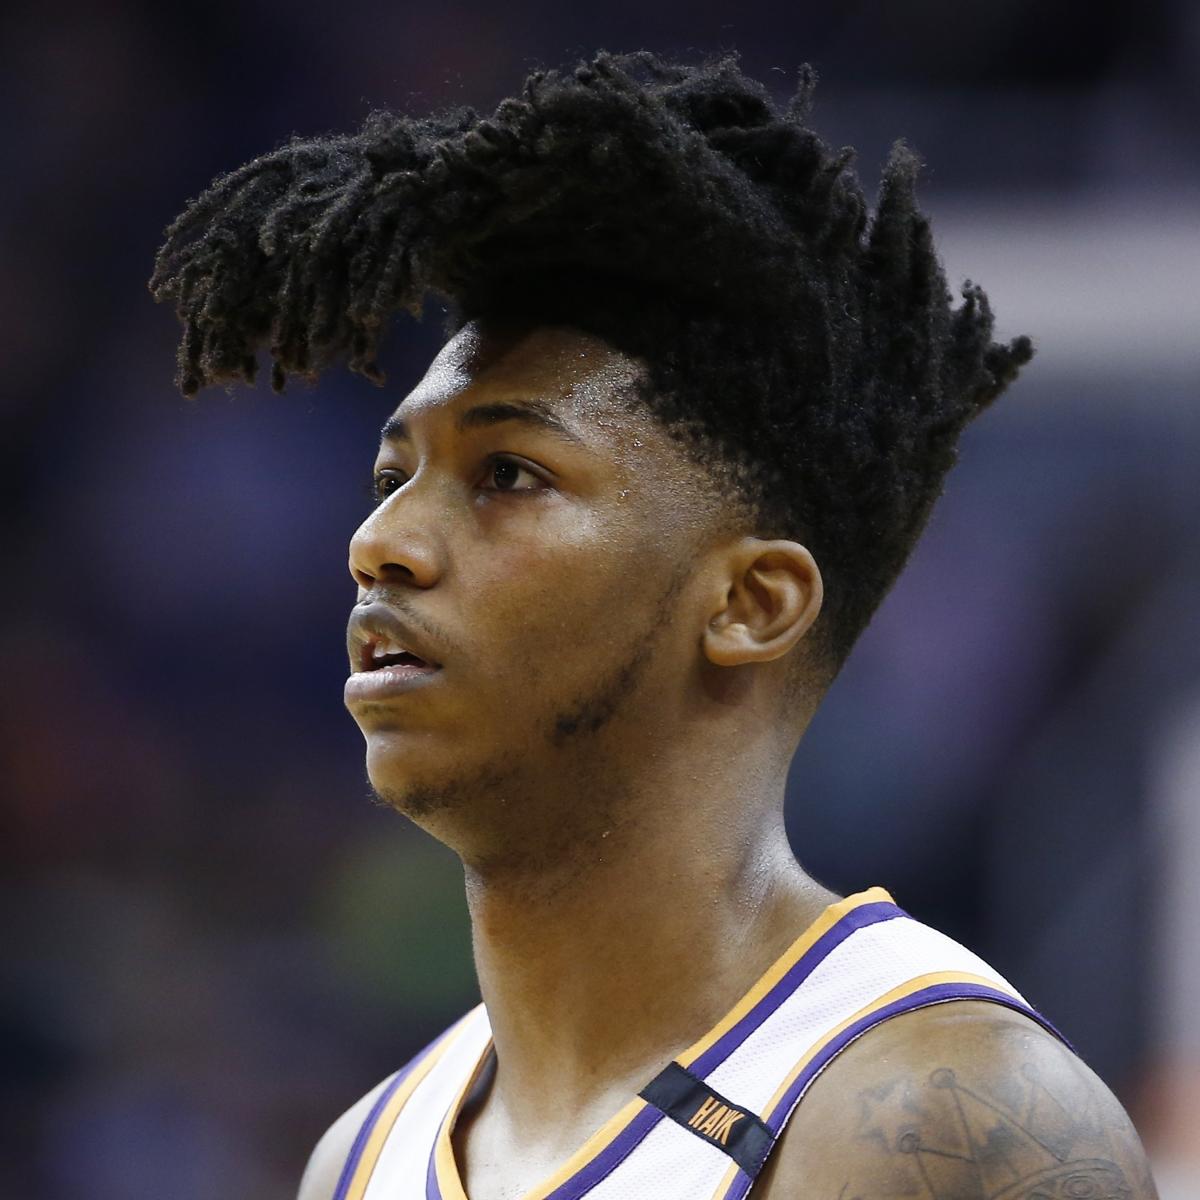 Suns PG Elfrid Payton Cuts Iconic Hair, Shows off New Look | Bleacher Report | Latest ...